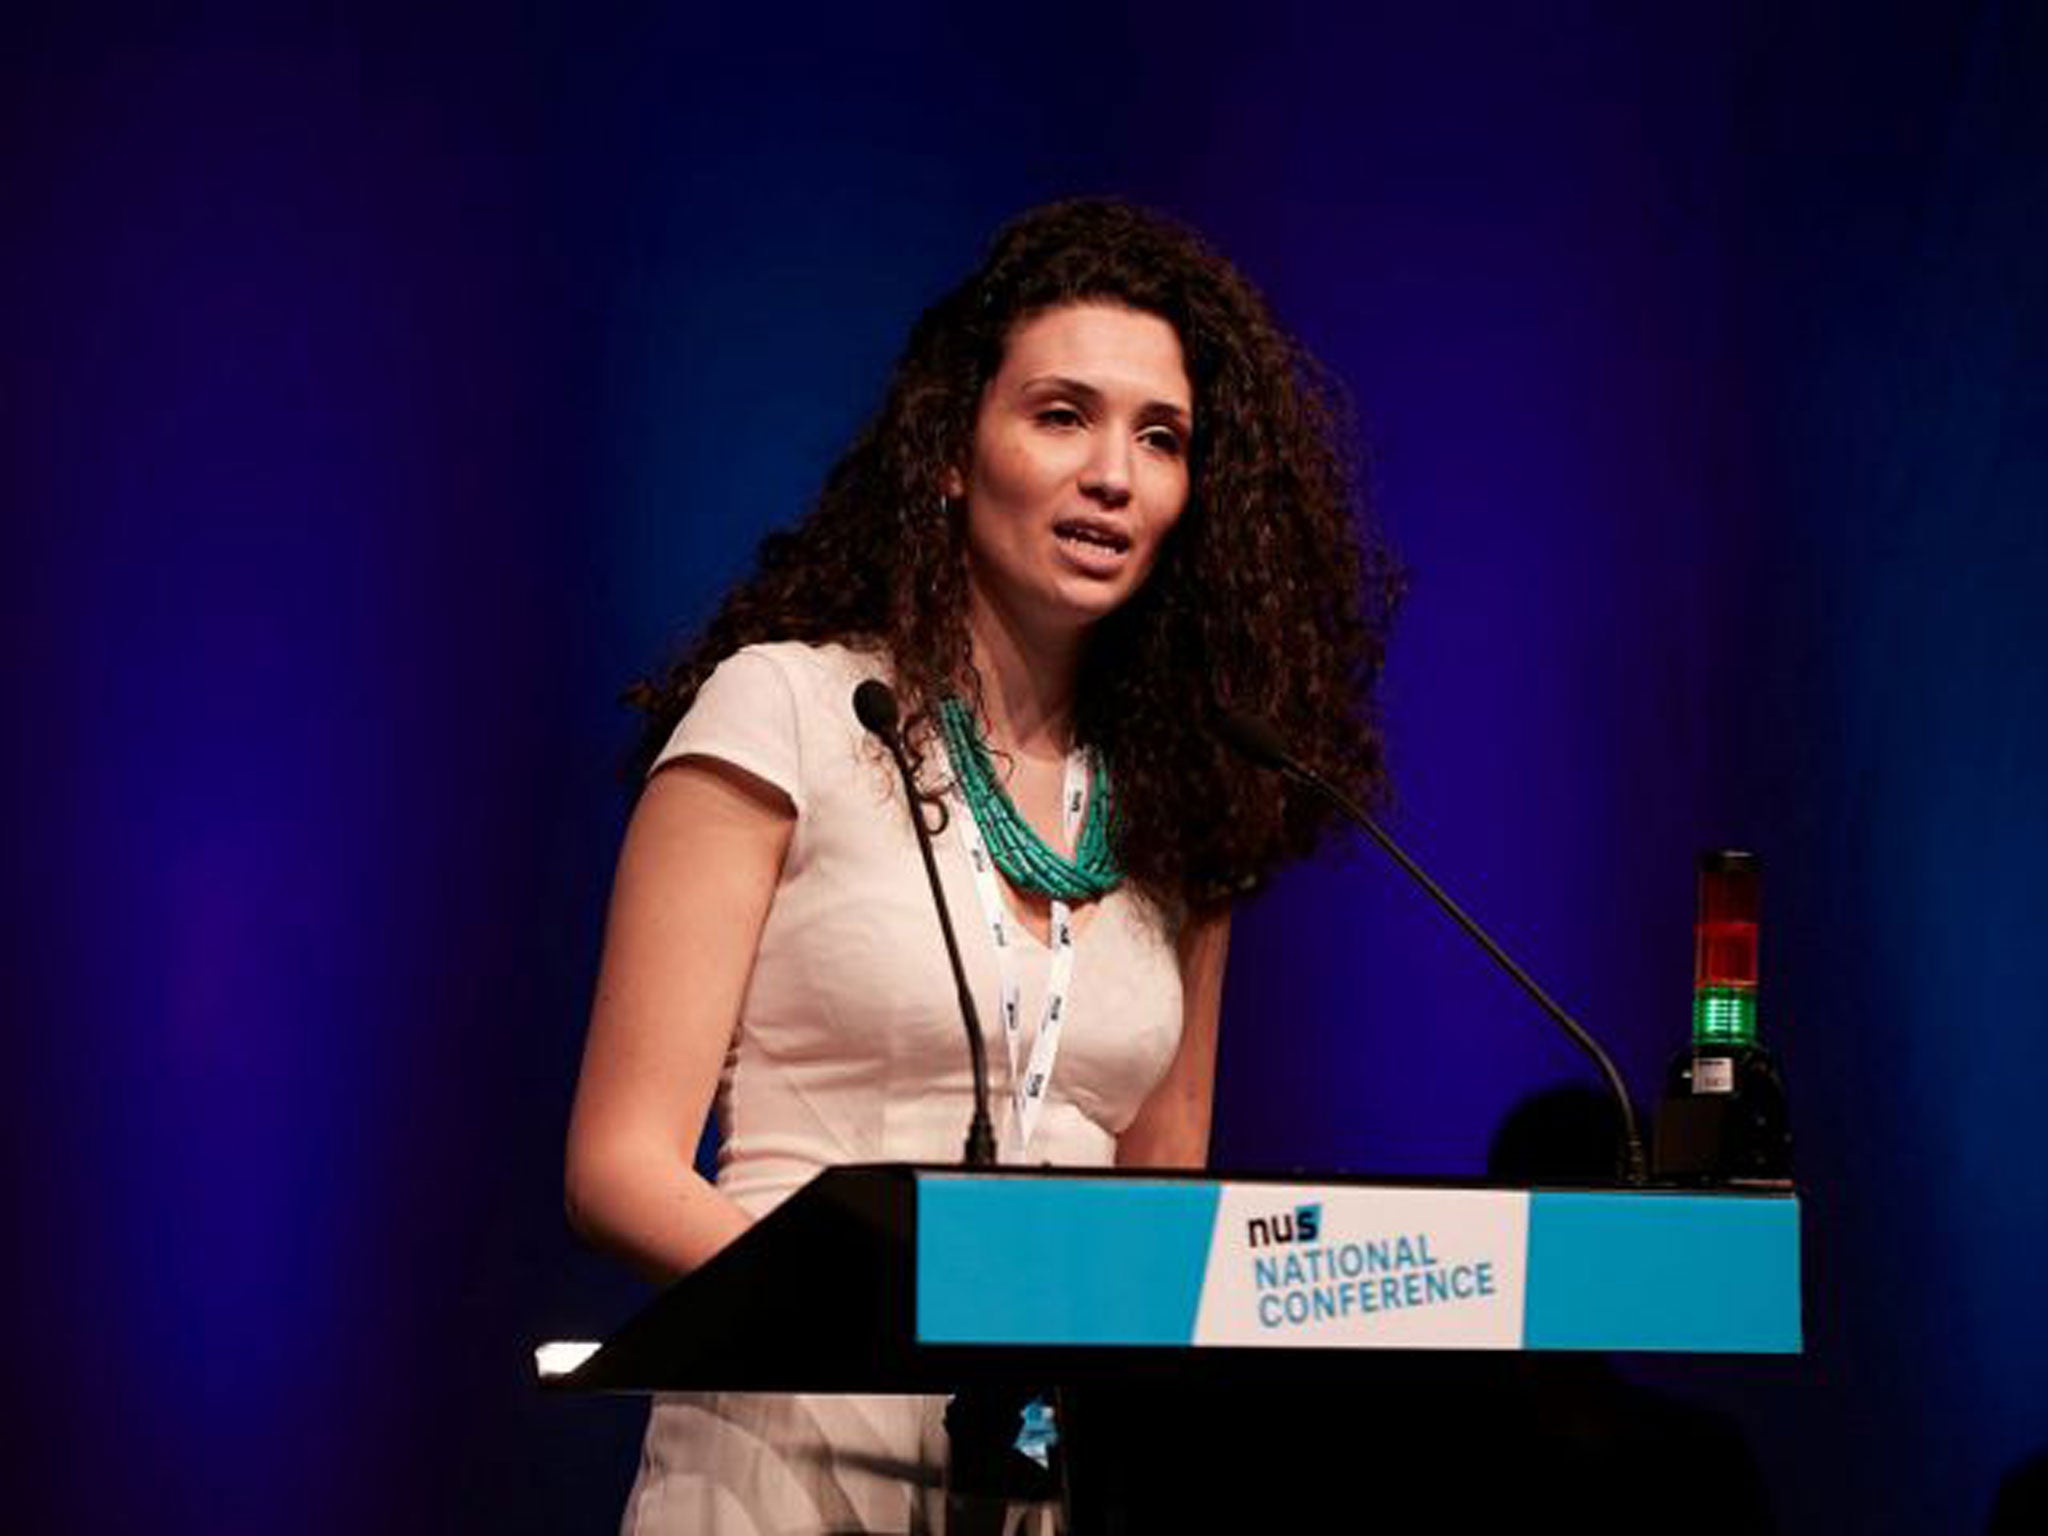 Malia Bouattia was elected NUS President in April and has defended the highly debated No Platform policy in UK universities